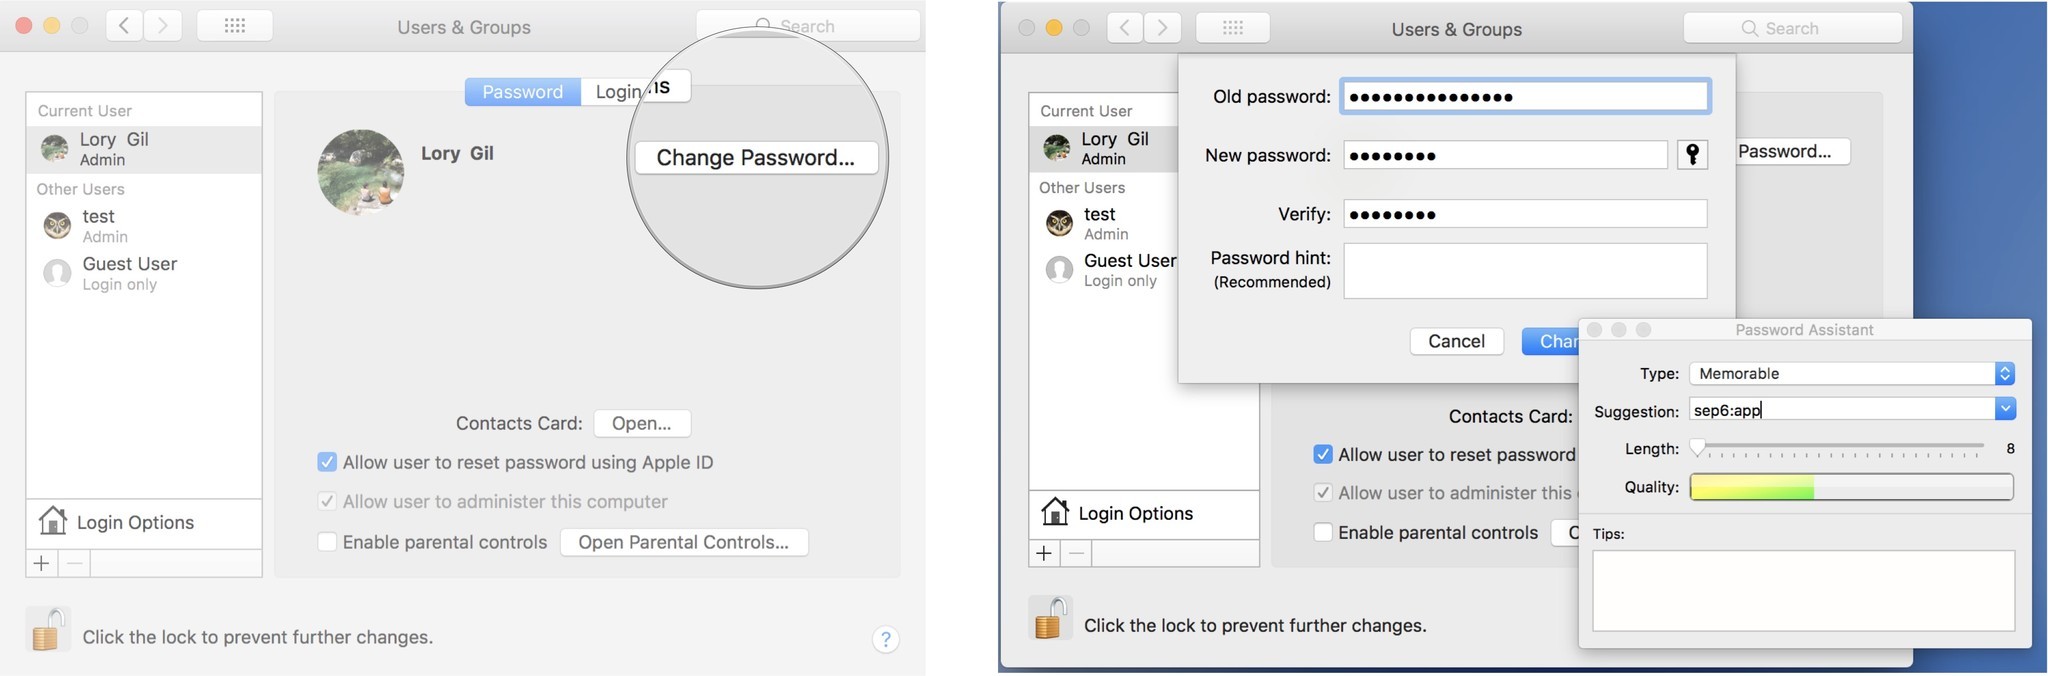 Click on Change Password, then enter the old and new passwords